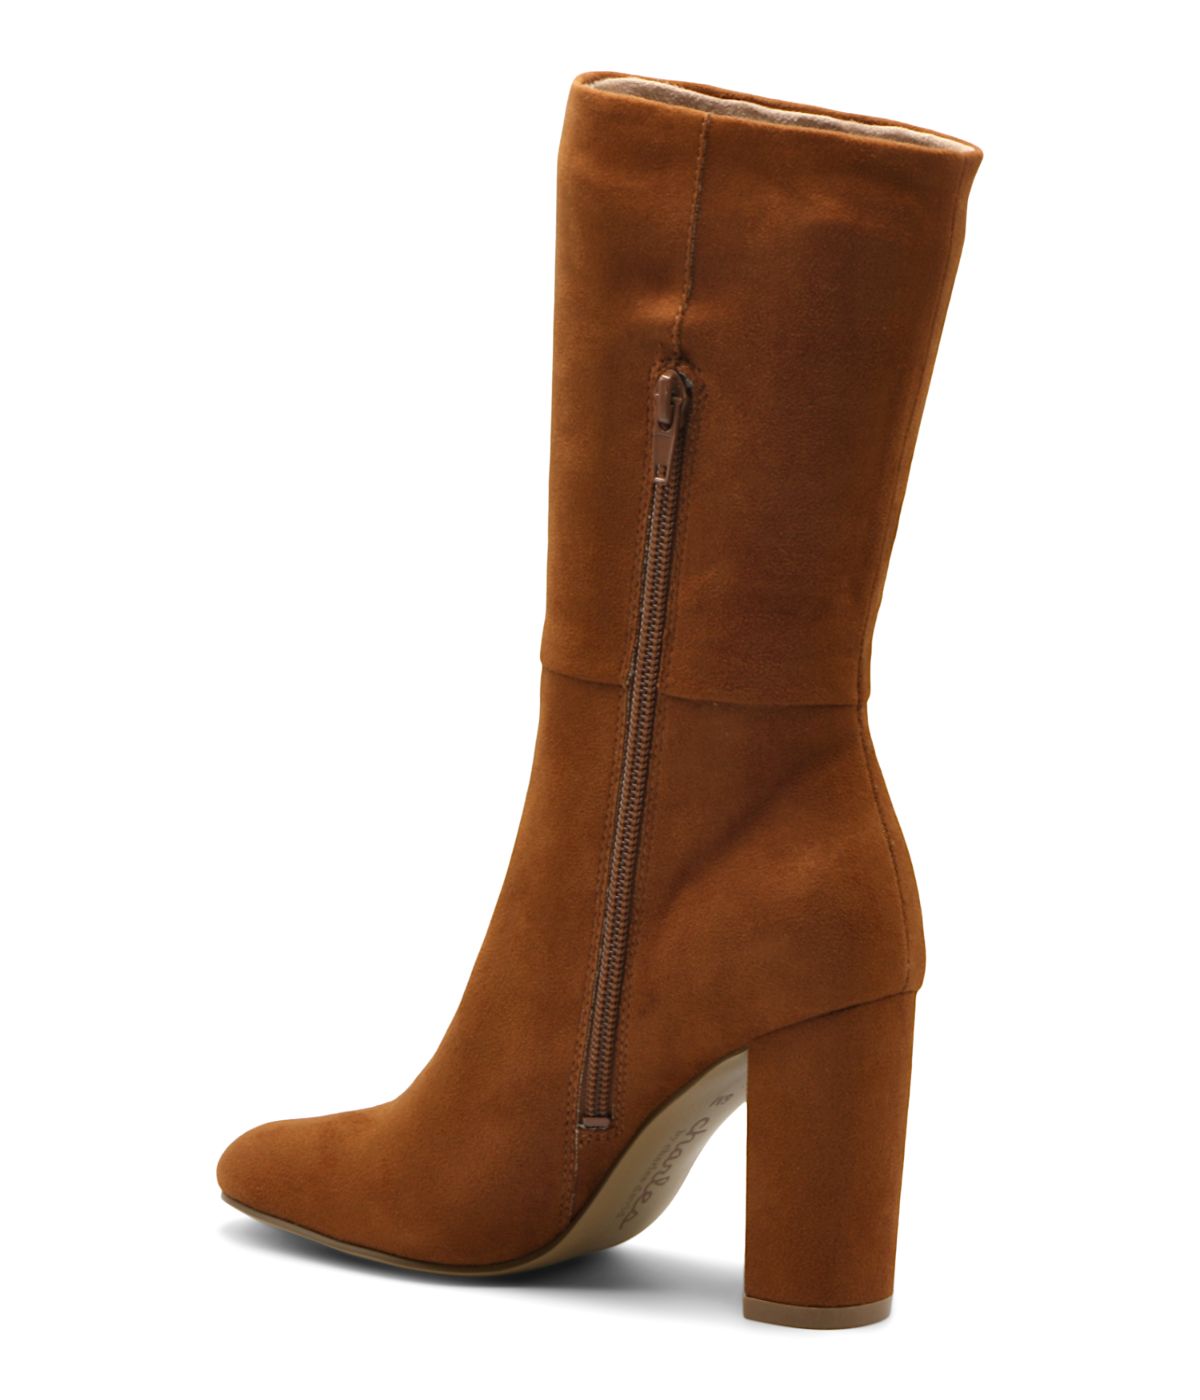 Charles by Charles David Billow Boot Caramelized